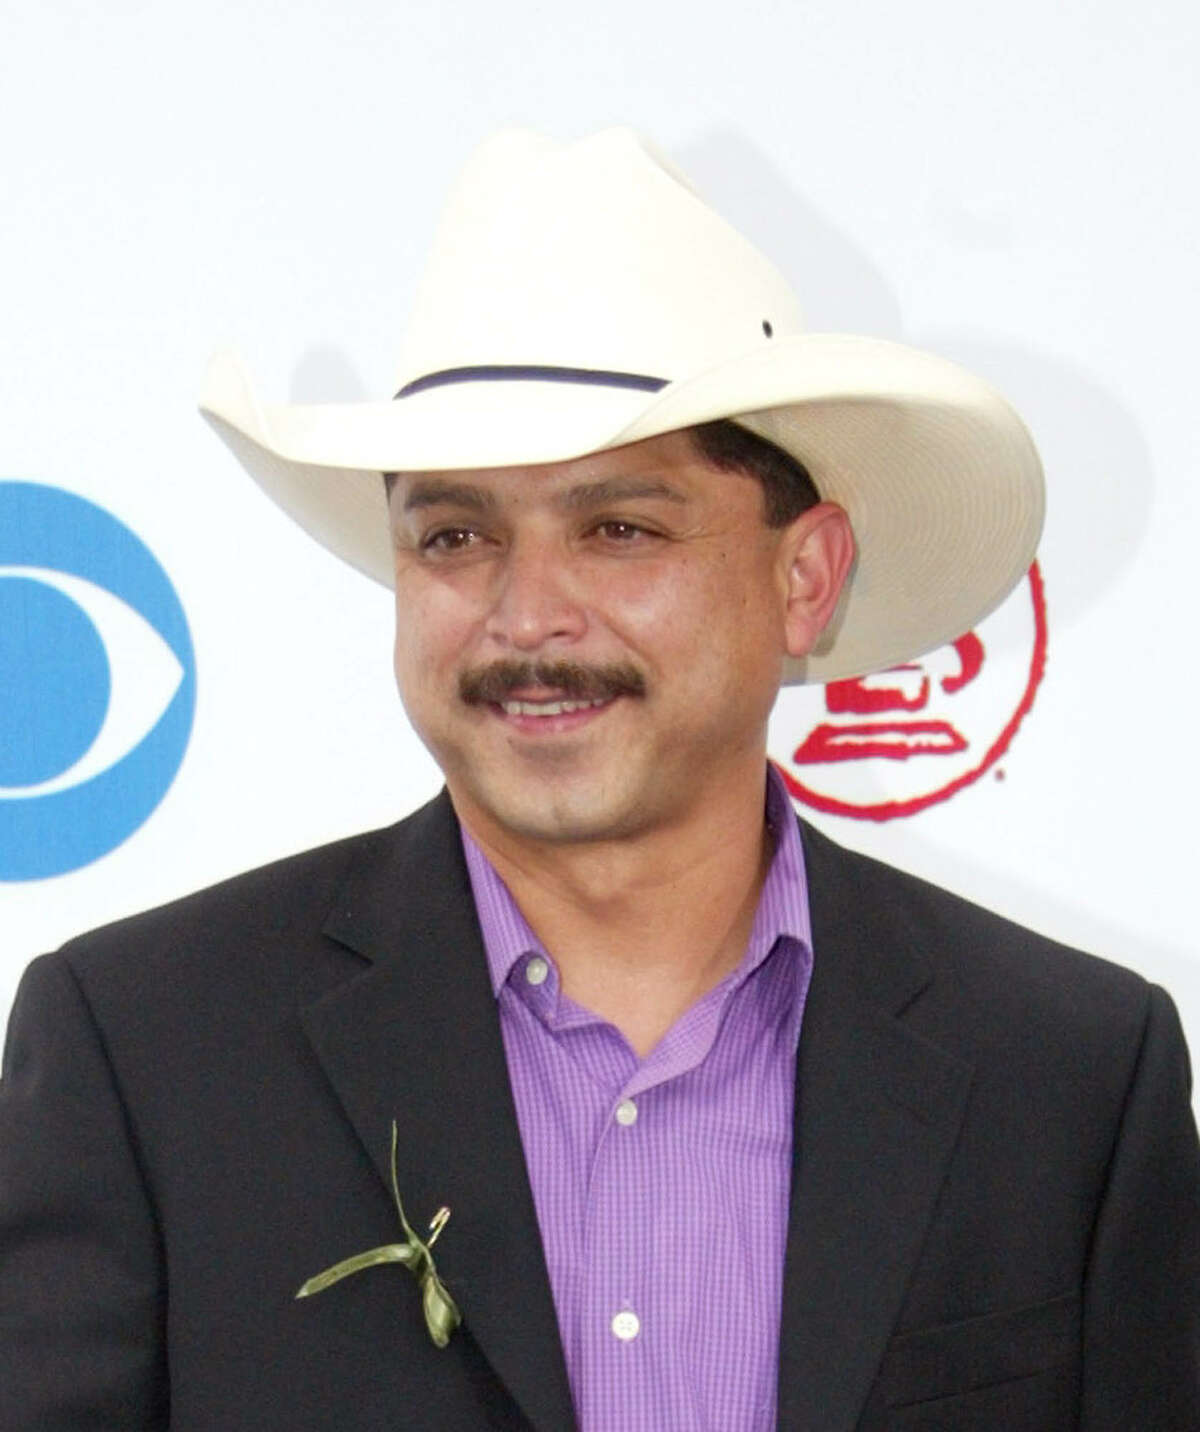 Emilio Navaira arrives at the Latin Grammy Awards in Miami in 2003. Navaira was Tejano music’s biggest male star during the music’s heyday.